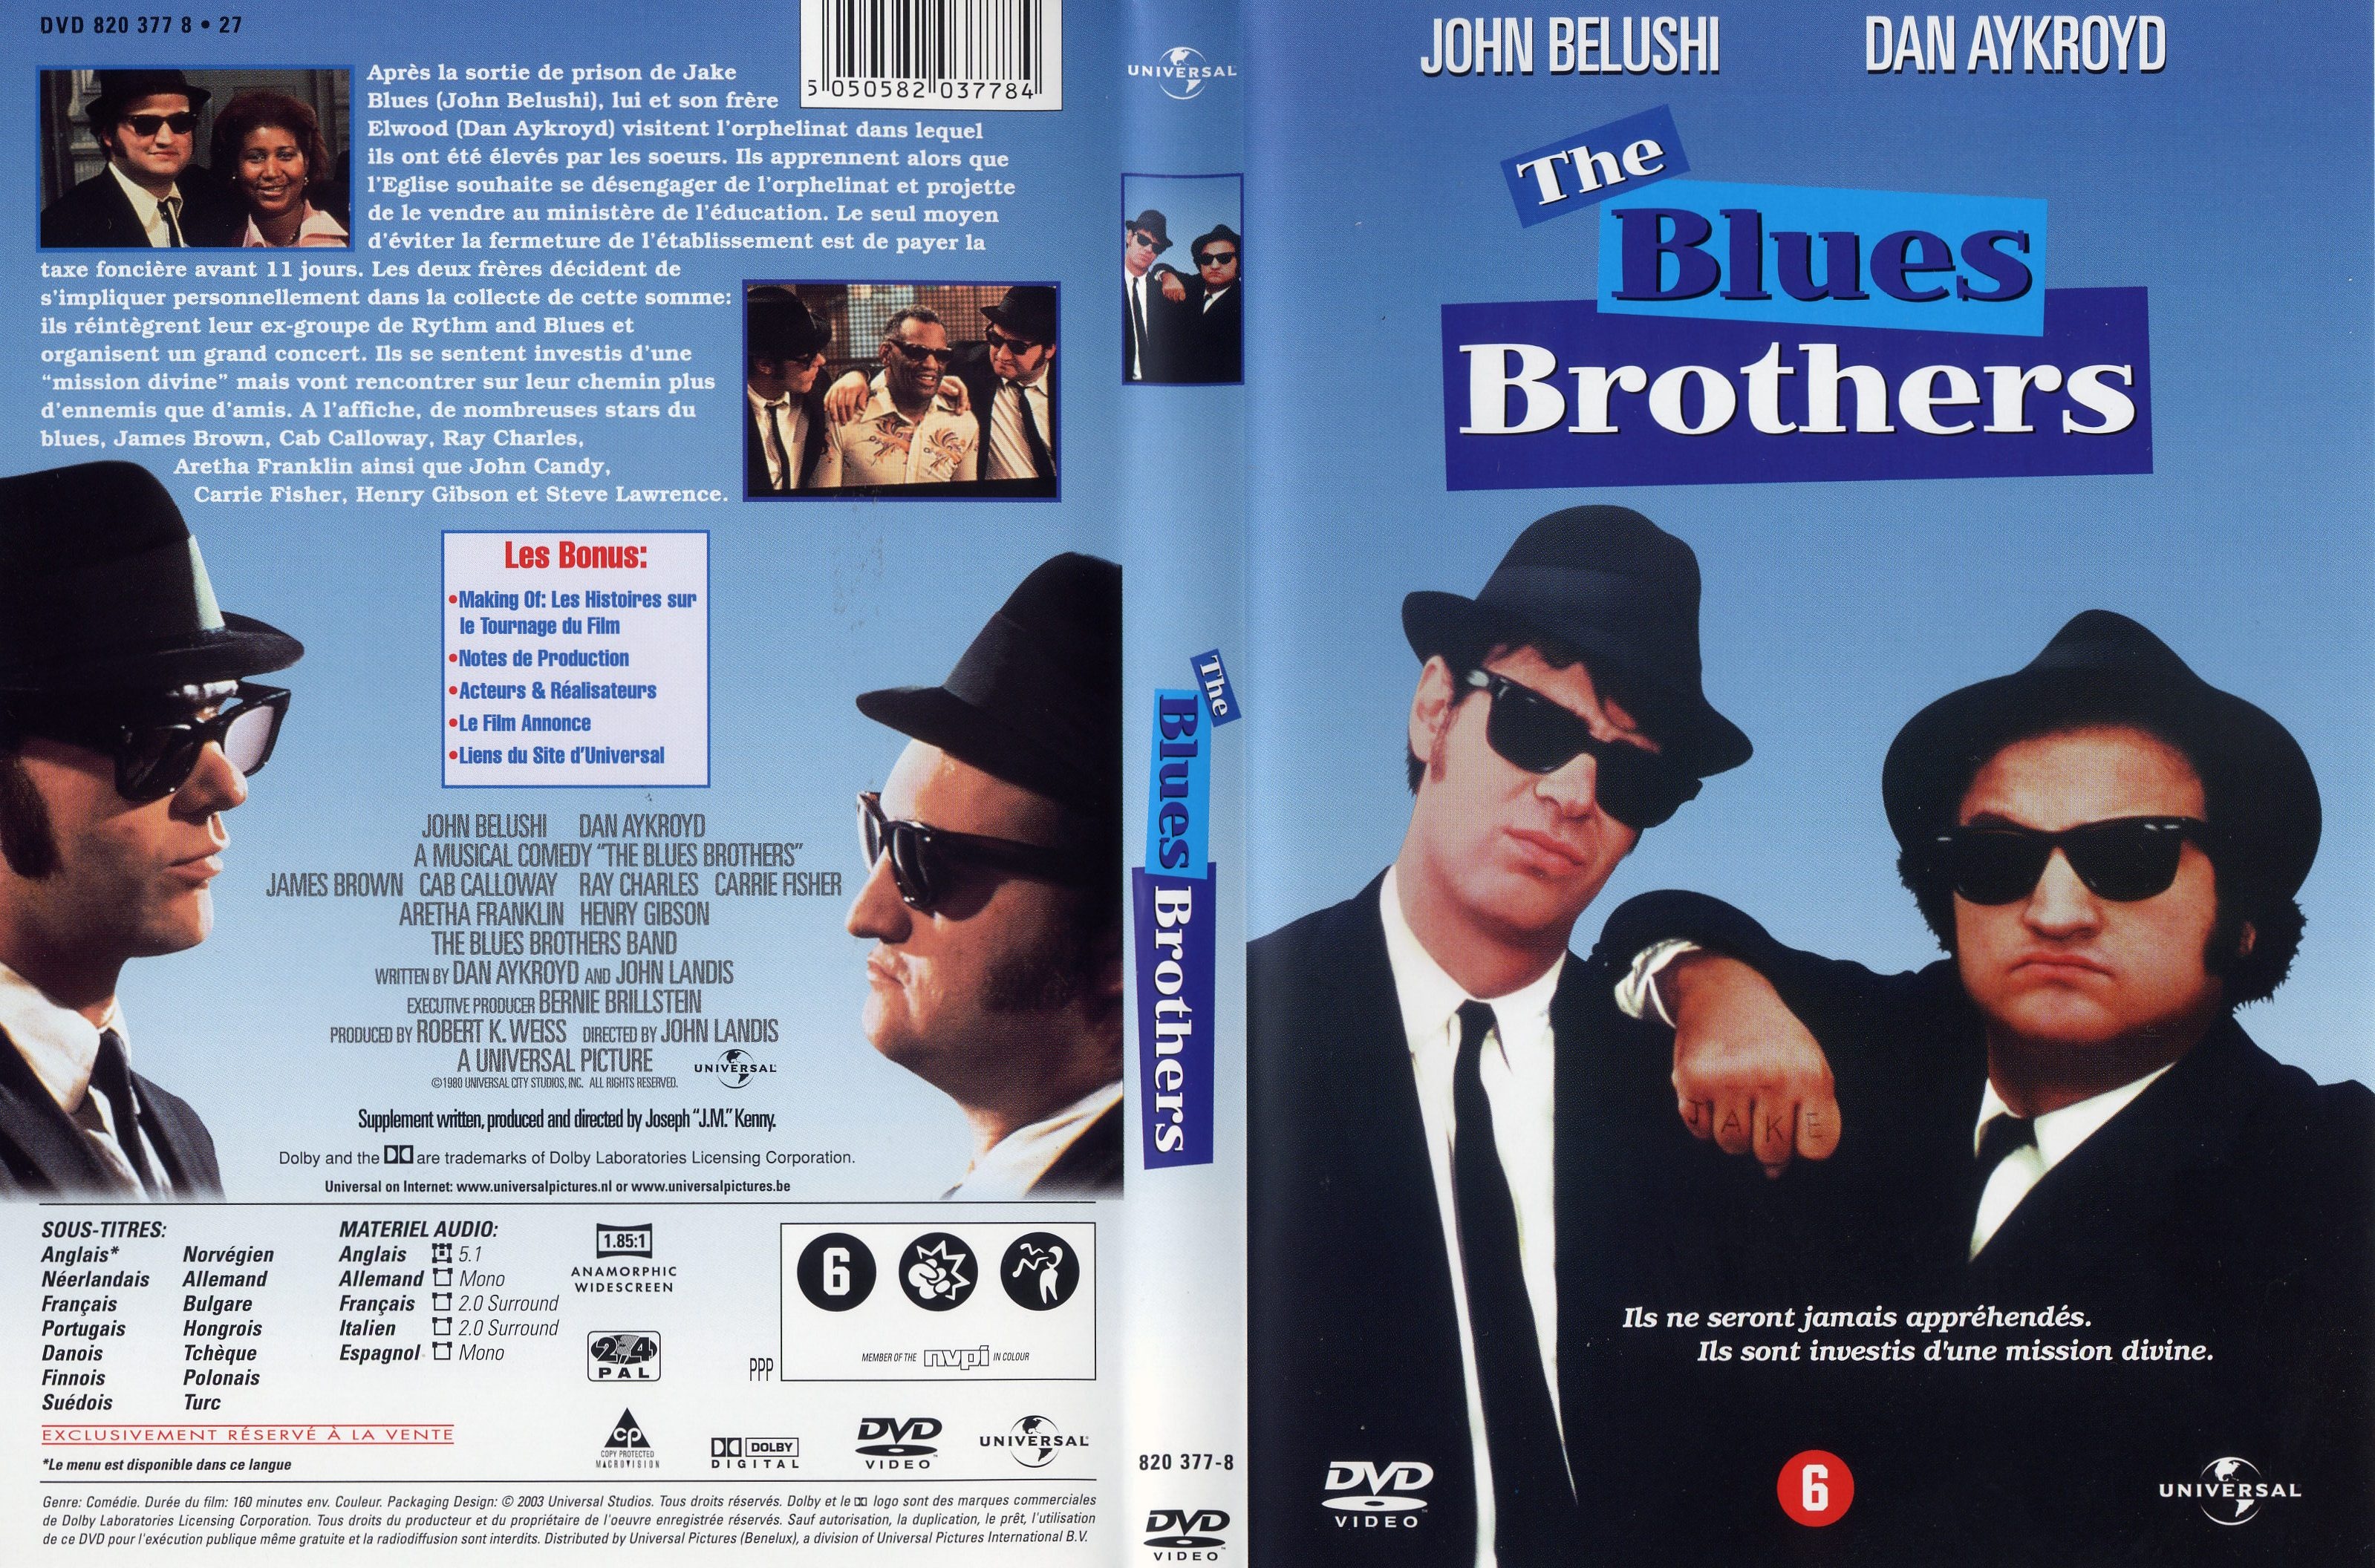 Jaquette DVD The Blues Brothers v3